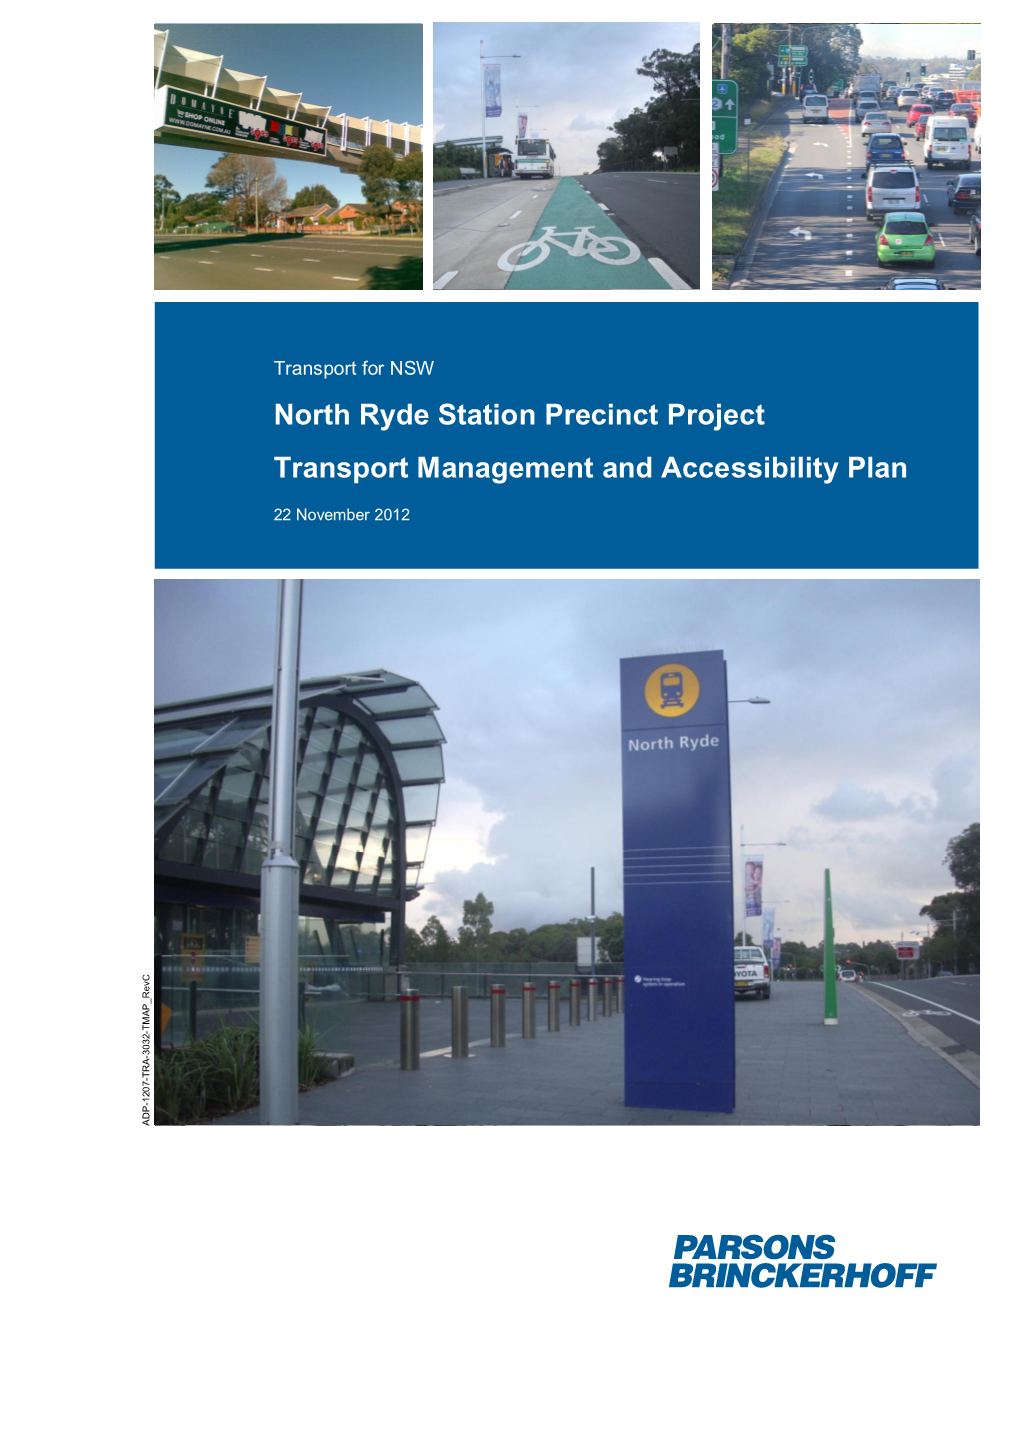 North Ryde Station Precinct Project Transport Management and Accessibility Plan